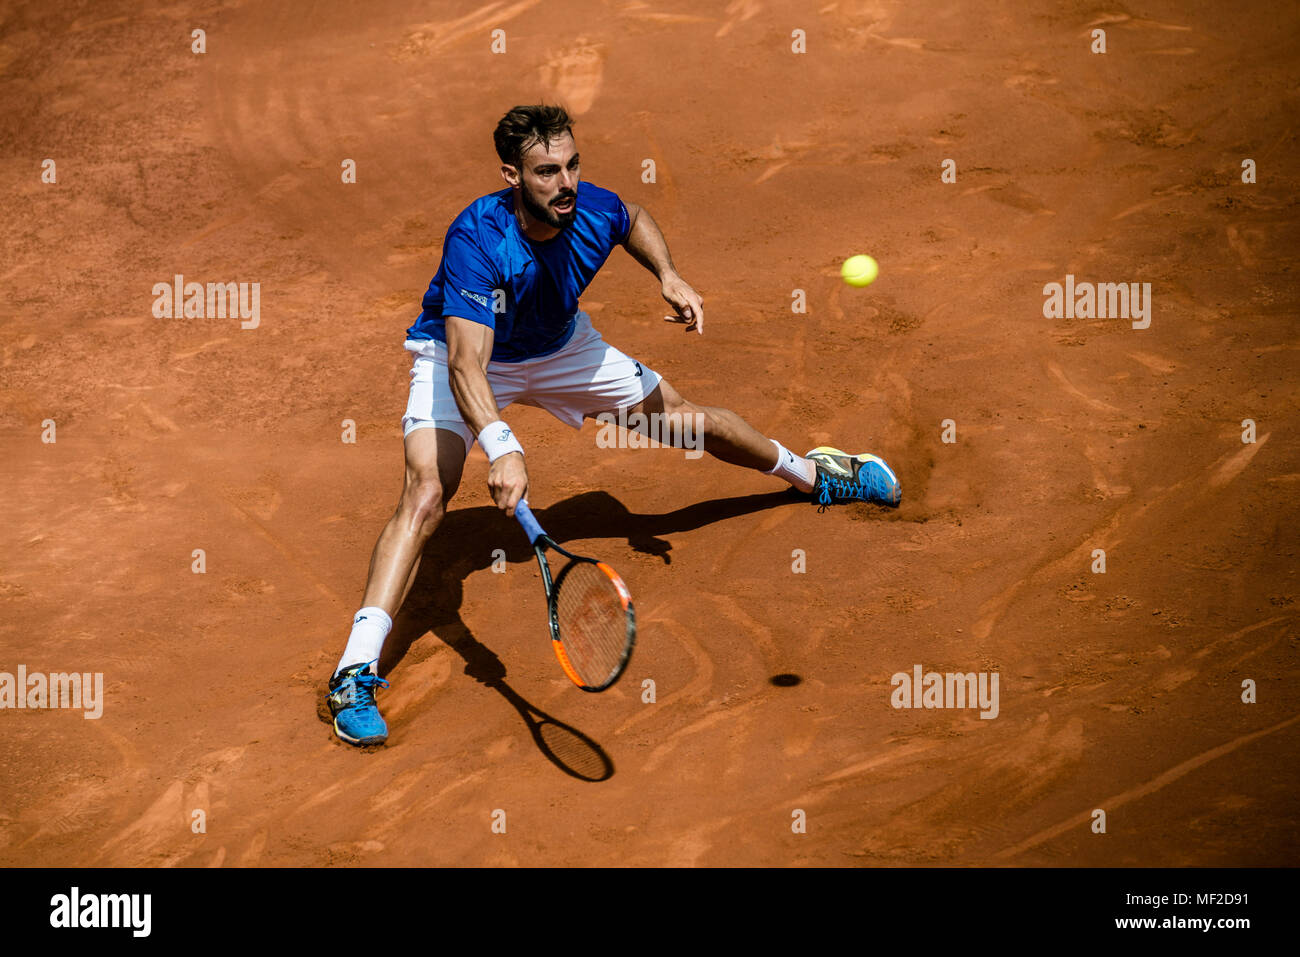 Barcelona, Spain. 24 April, 2018:  MARCEL GRANOLLERS (ESP) returns the ball to David Goffin (BEL) during Day 2 of the 'Barcelona Open Banc Sabadell' 2018. 4:6, 7:6, 6:2 Credit: Matthias Oesterle/Alamy Live News Stock Photo